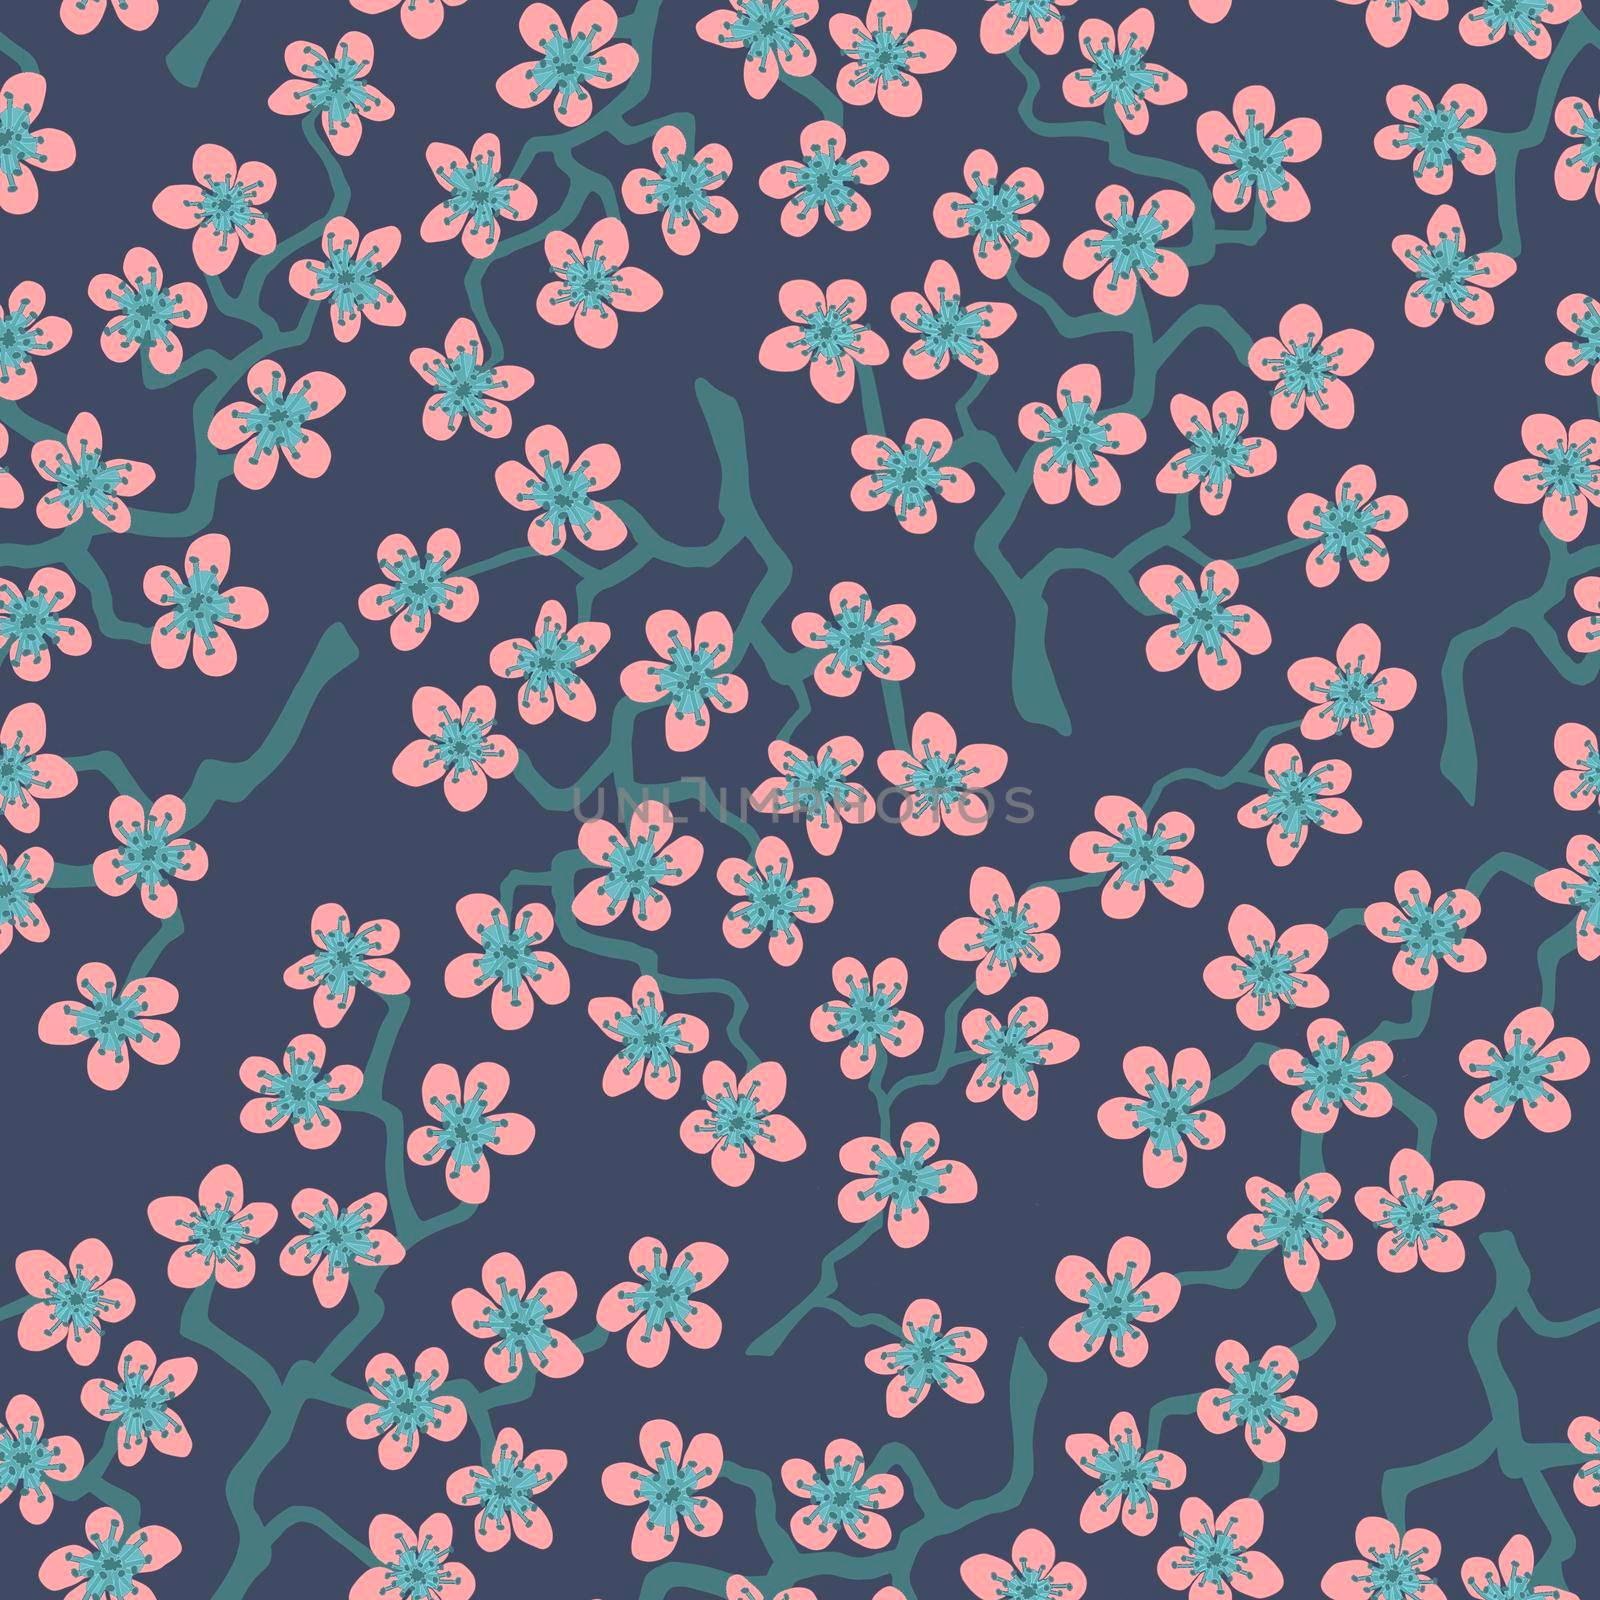 Seamless pattern with blossoming Japanese cherry sakura branches for fabric,packaging,wallpaper,textile decor,design, invitations,cards,print,gift wrap,manufacturing.Pink flowers on gray background